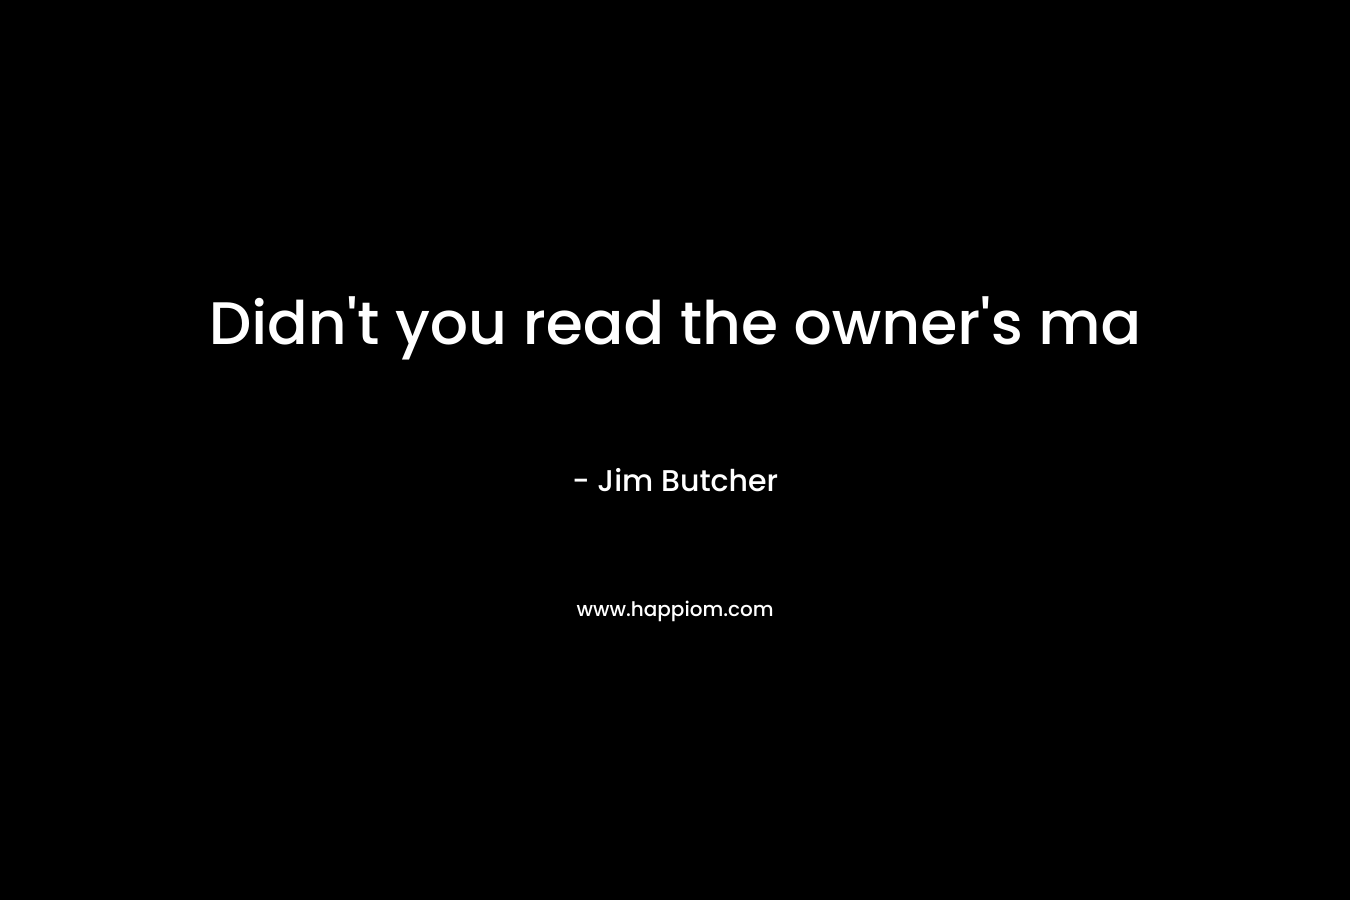 Didn’t you read the owner’s ma – Jim Butcher